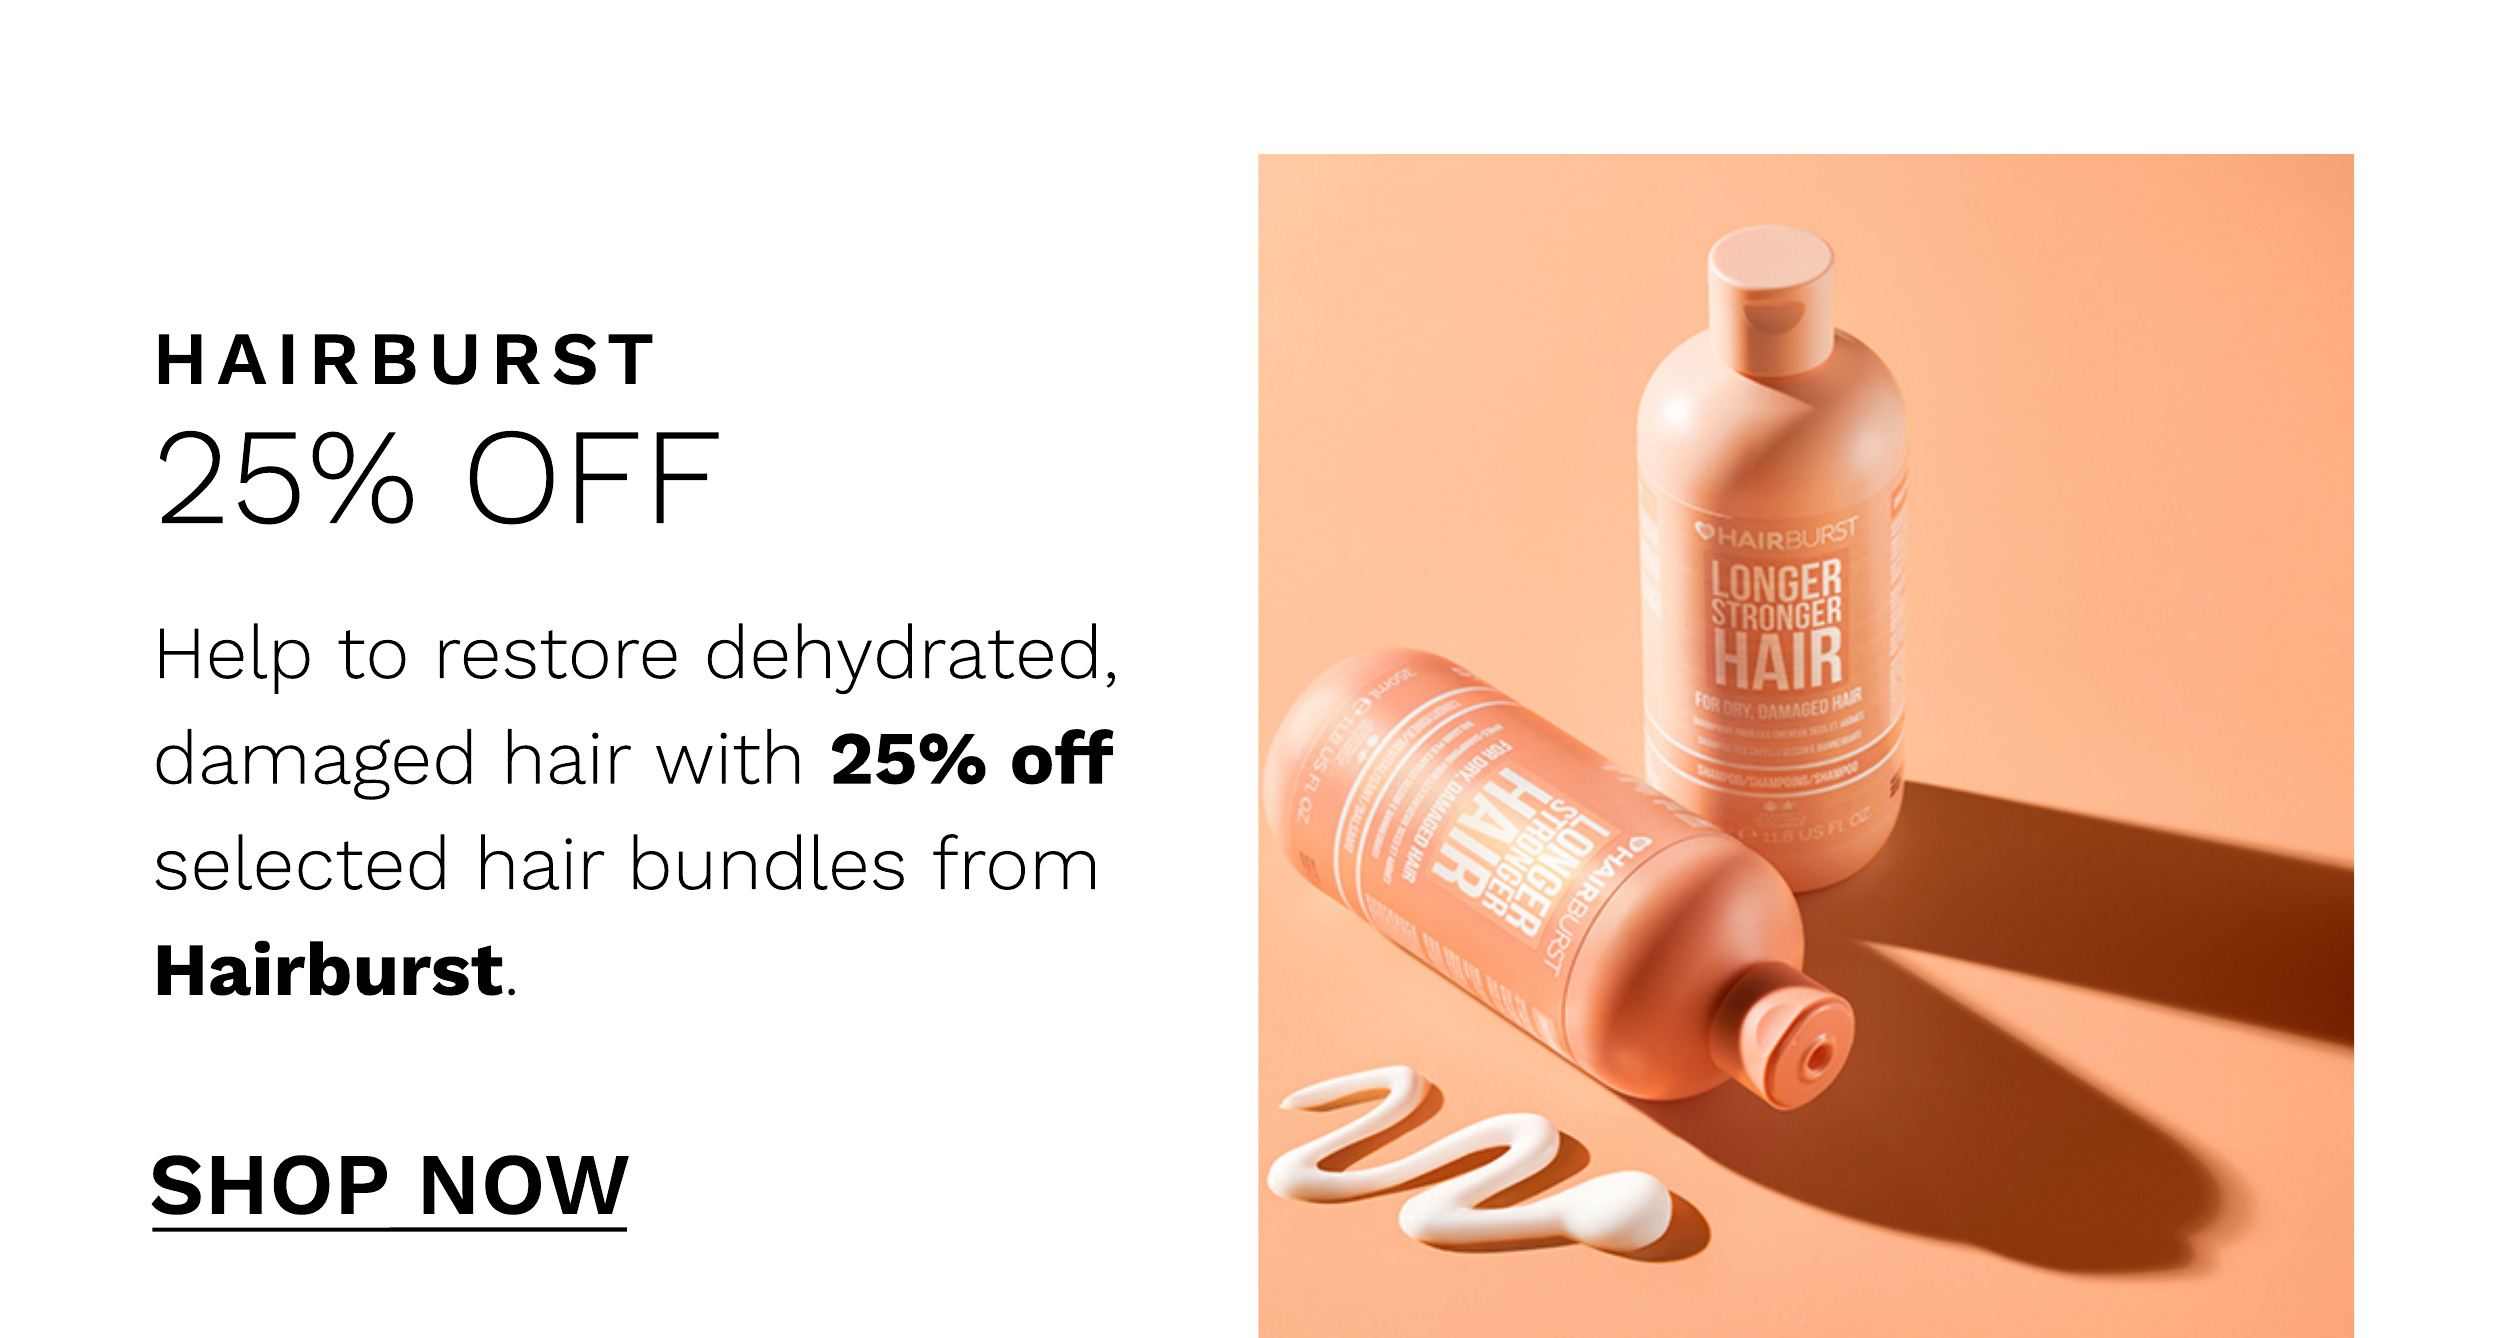 HAIRBURST 25% OFF Help to restore dehydrated, damaged hair with 25% off selected hair bundles from Hairburst. SHOP NOW 